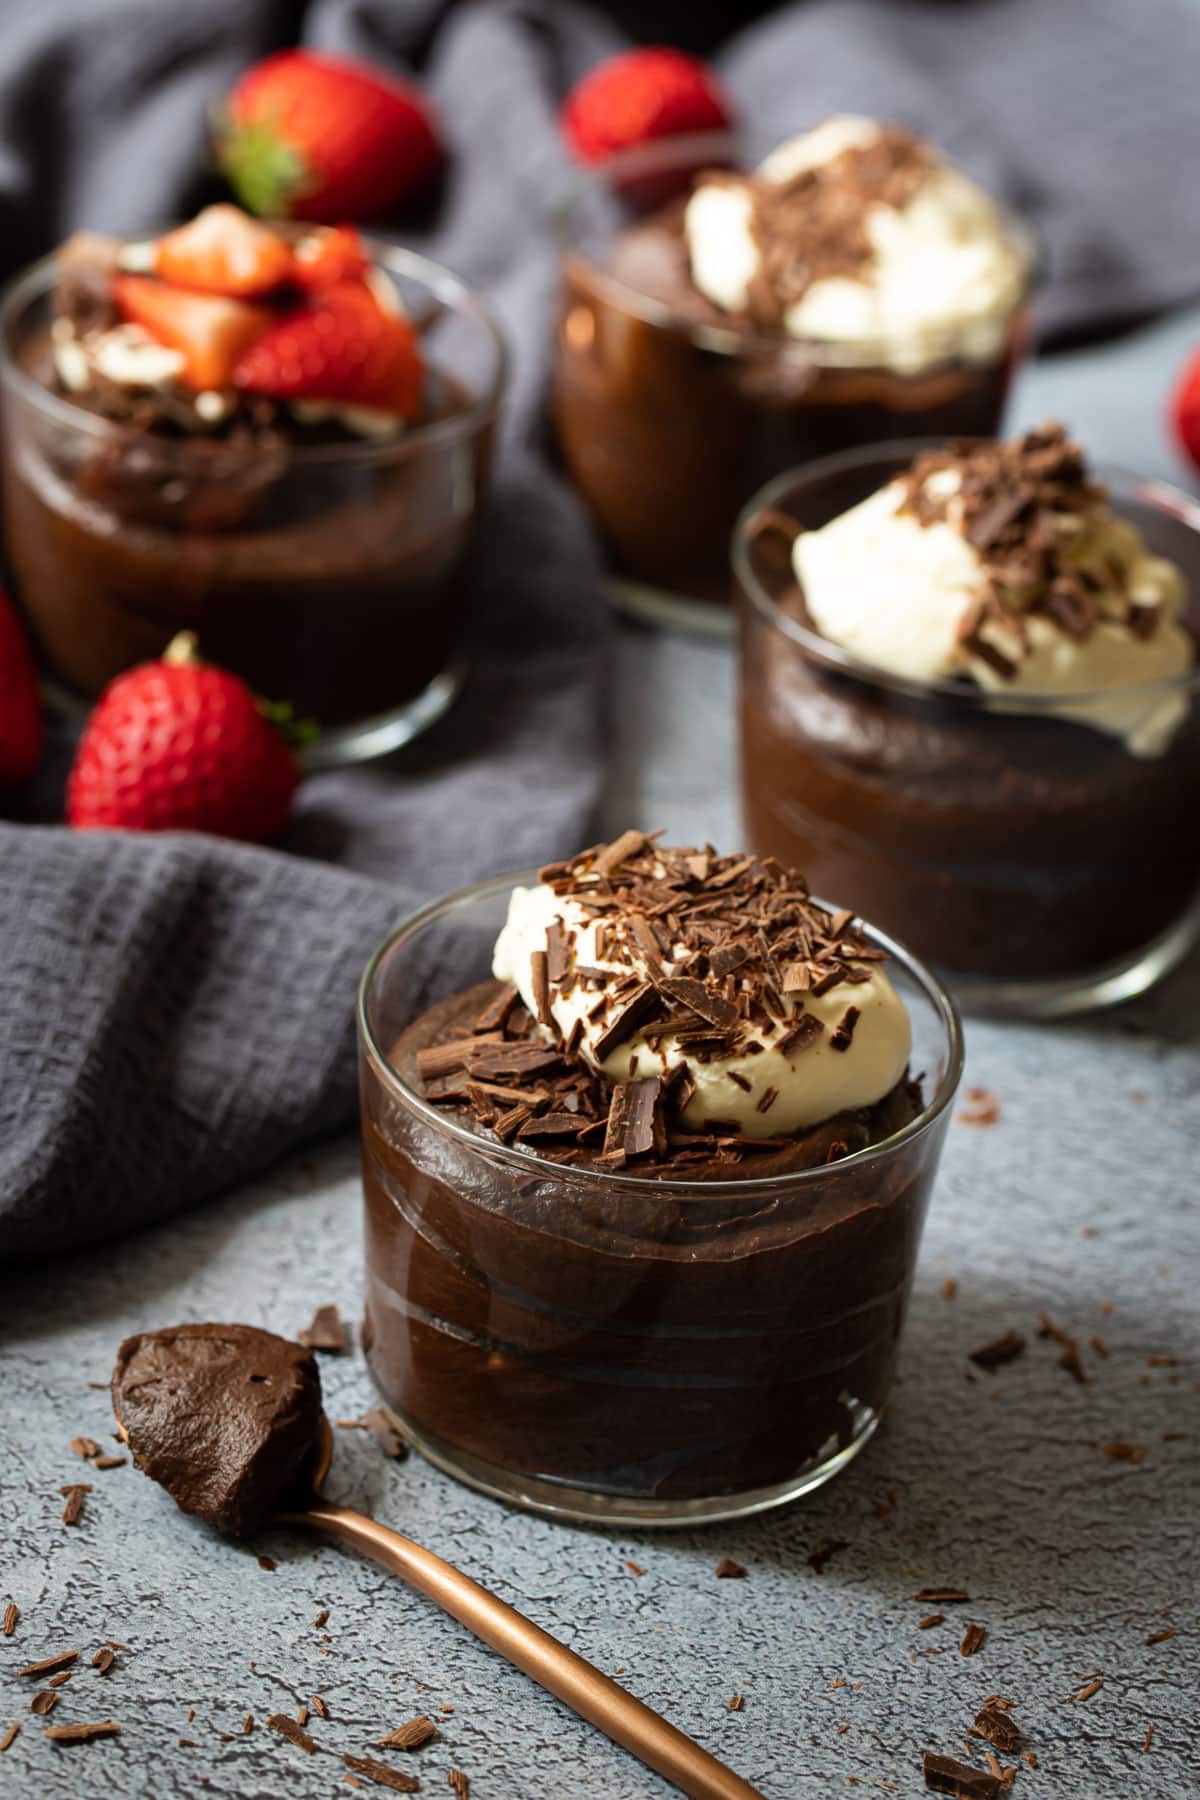 jars of chocolate mousse on a table with strawberries and cream.